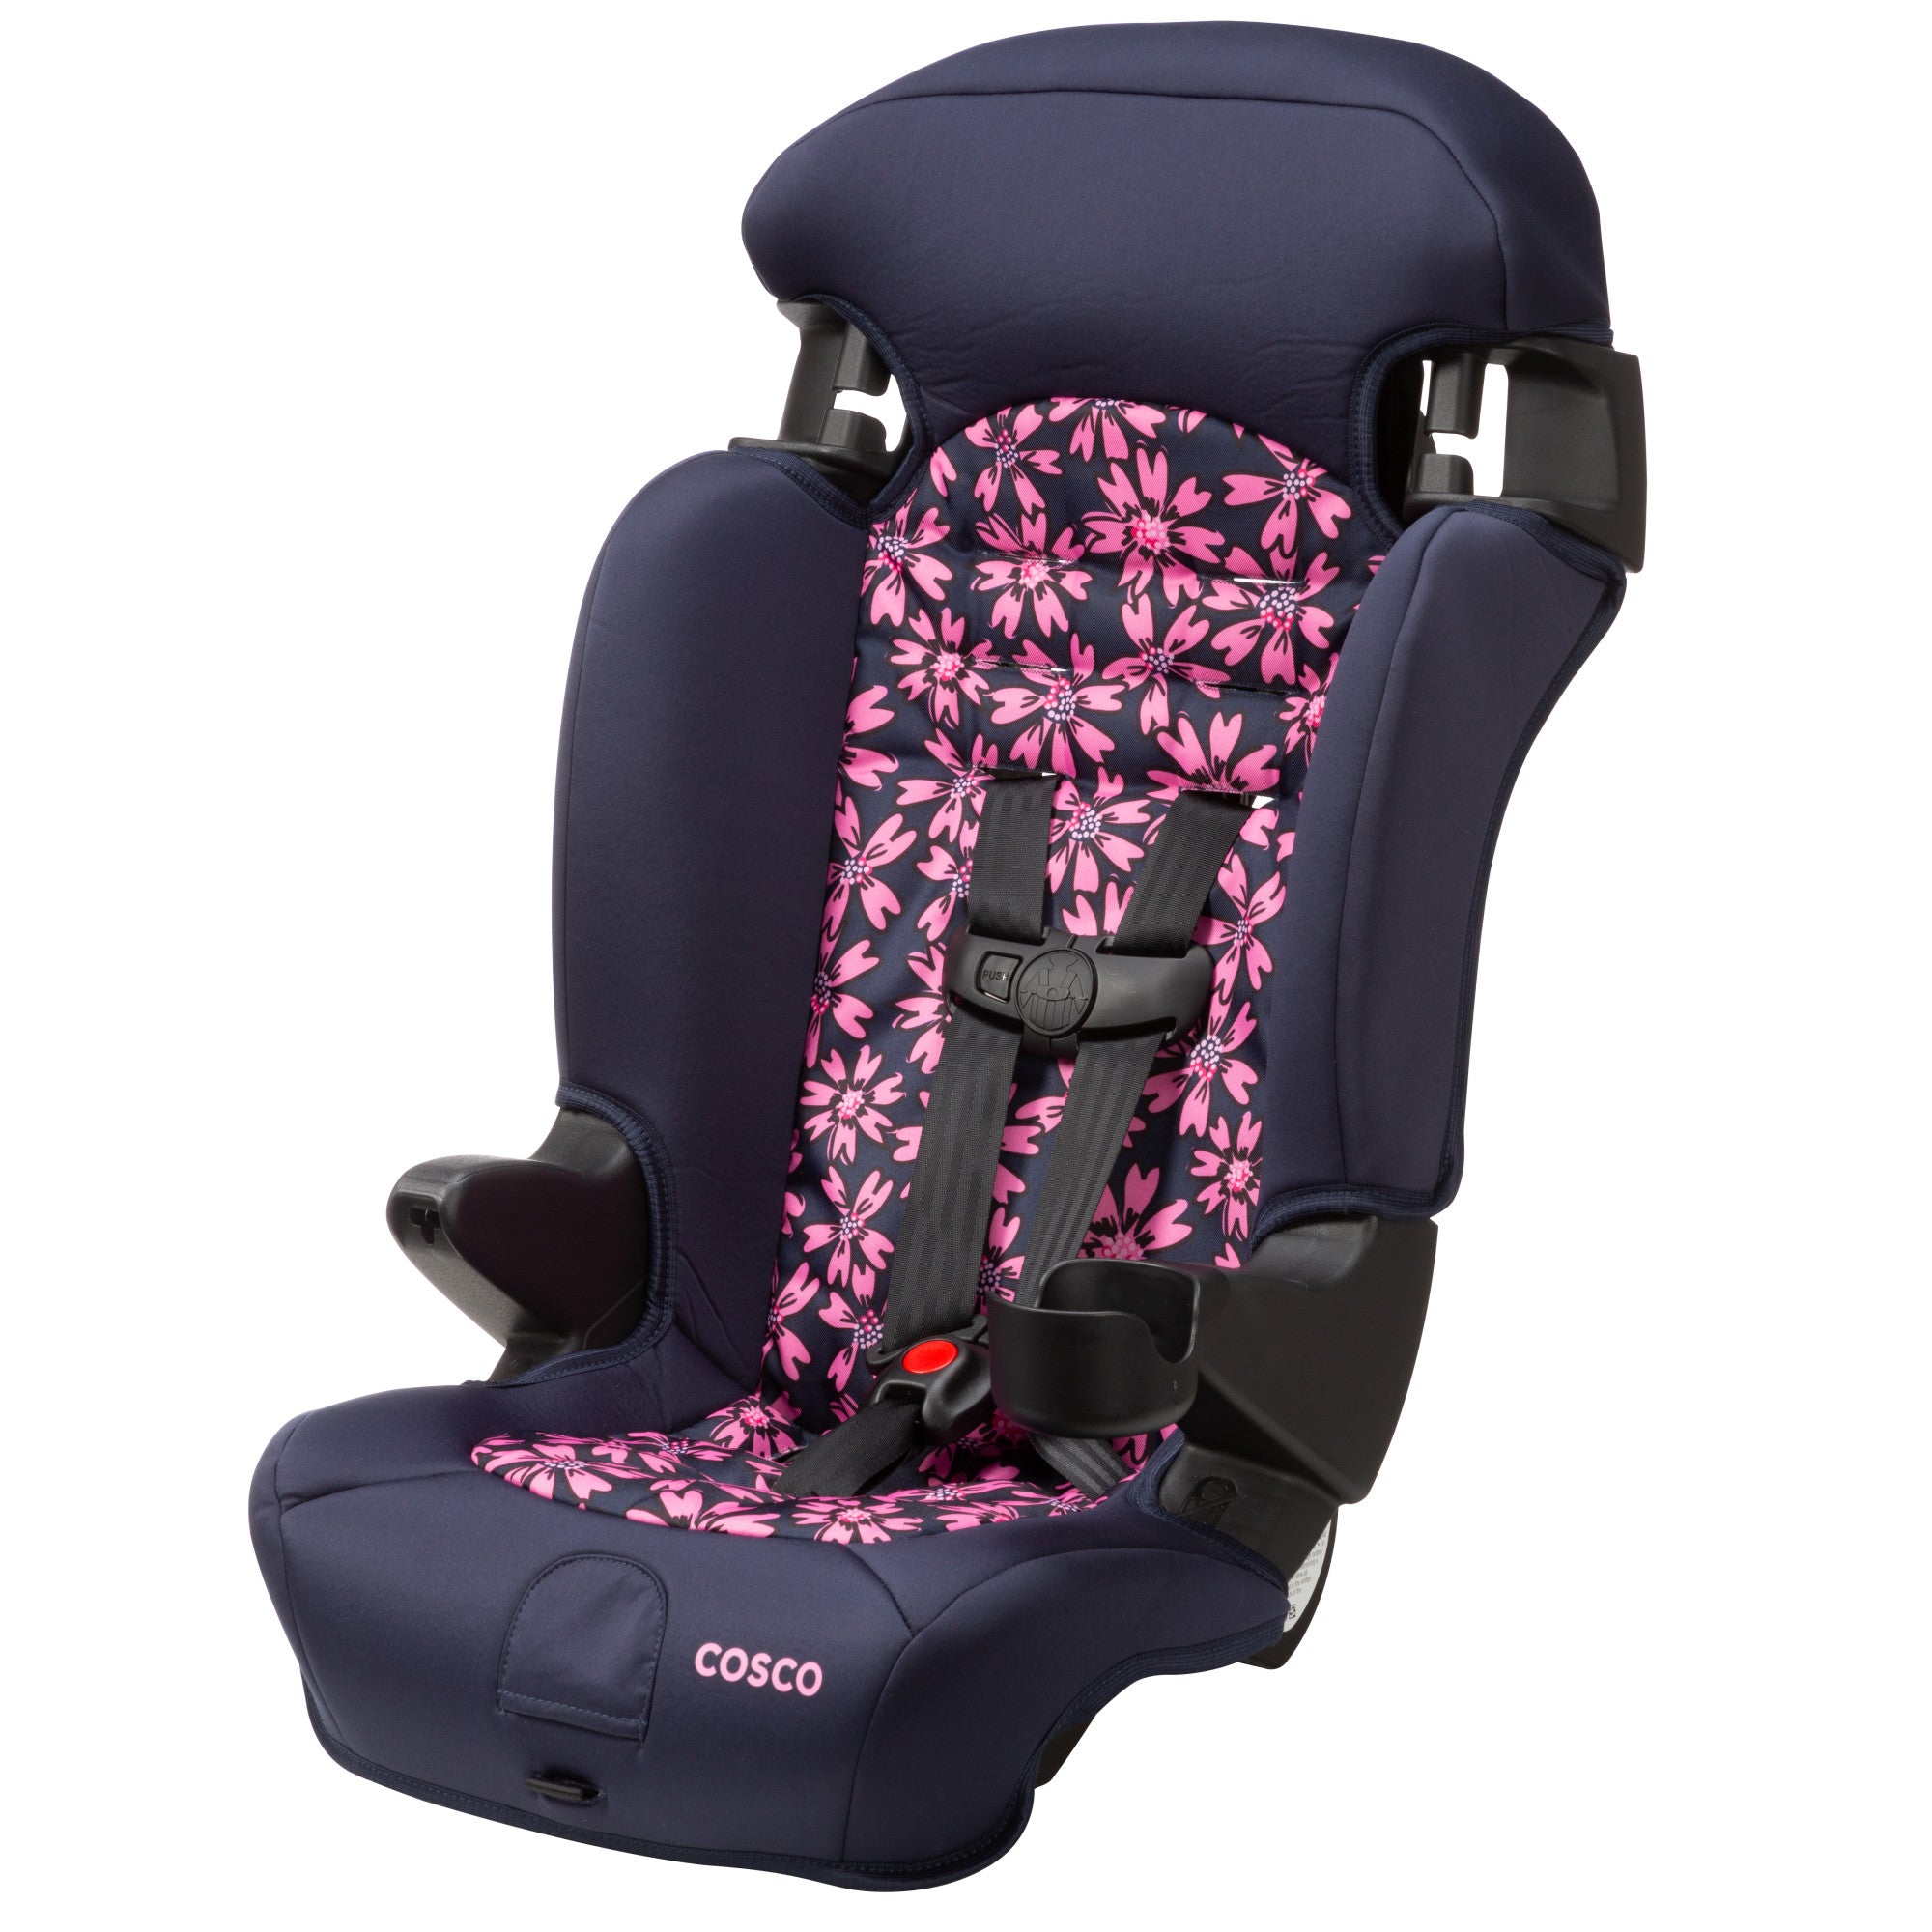 Finale 2-in-1 Booster Car Seat - Pink Amaryllis